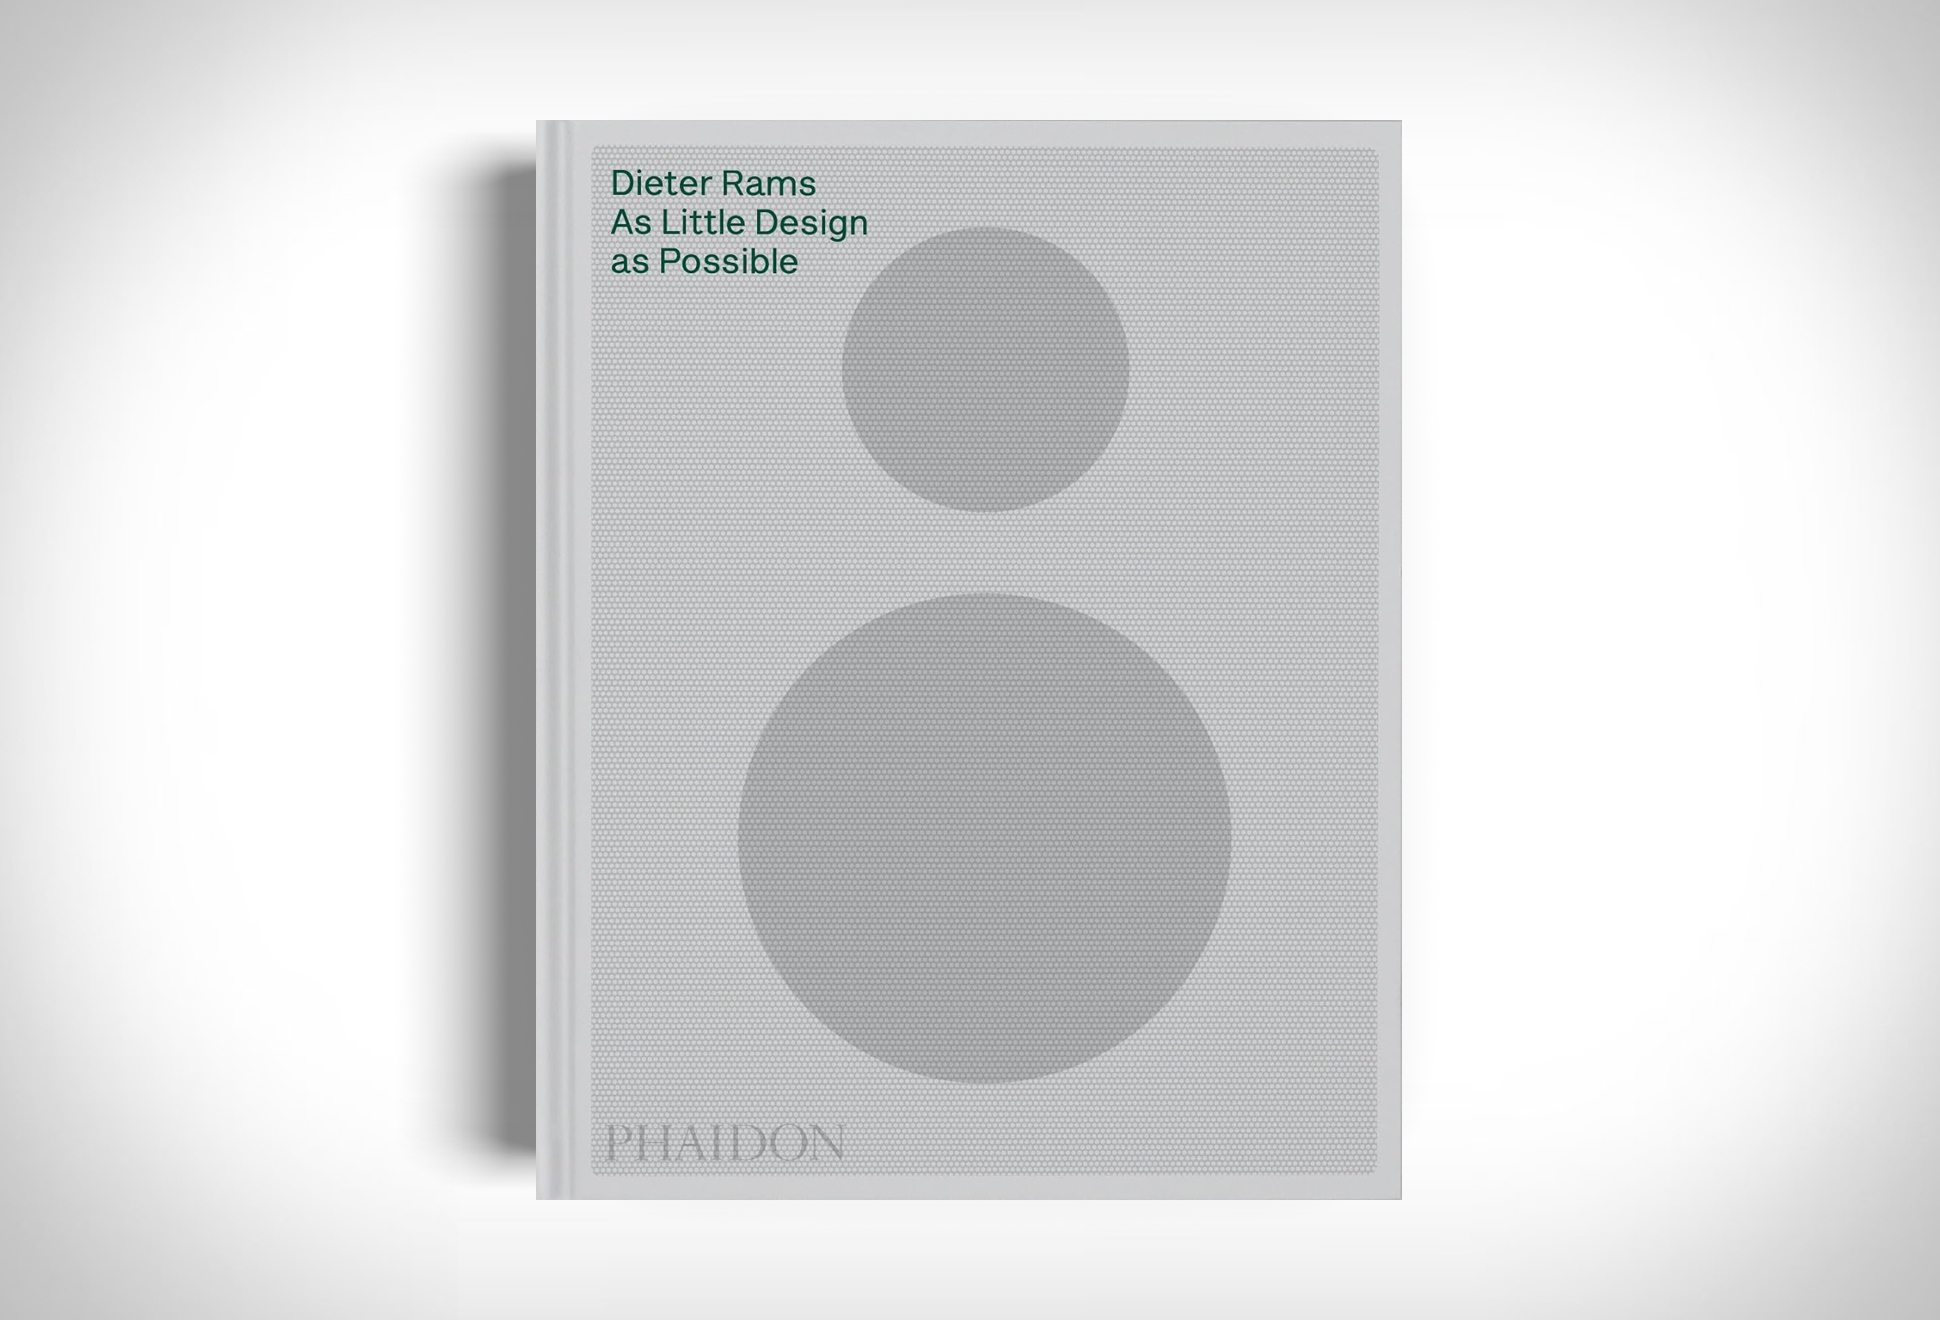 Dieter Rams: As Little Design as Possible | Image